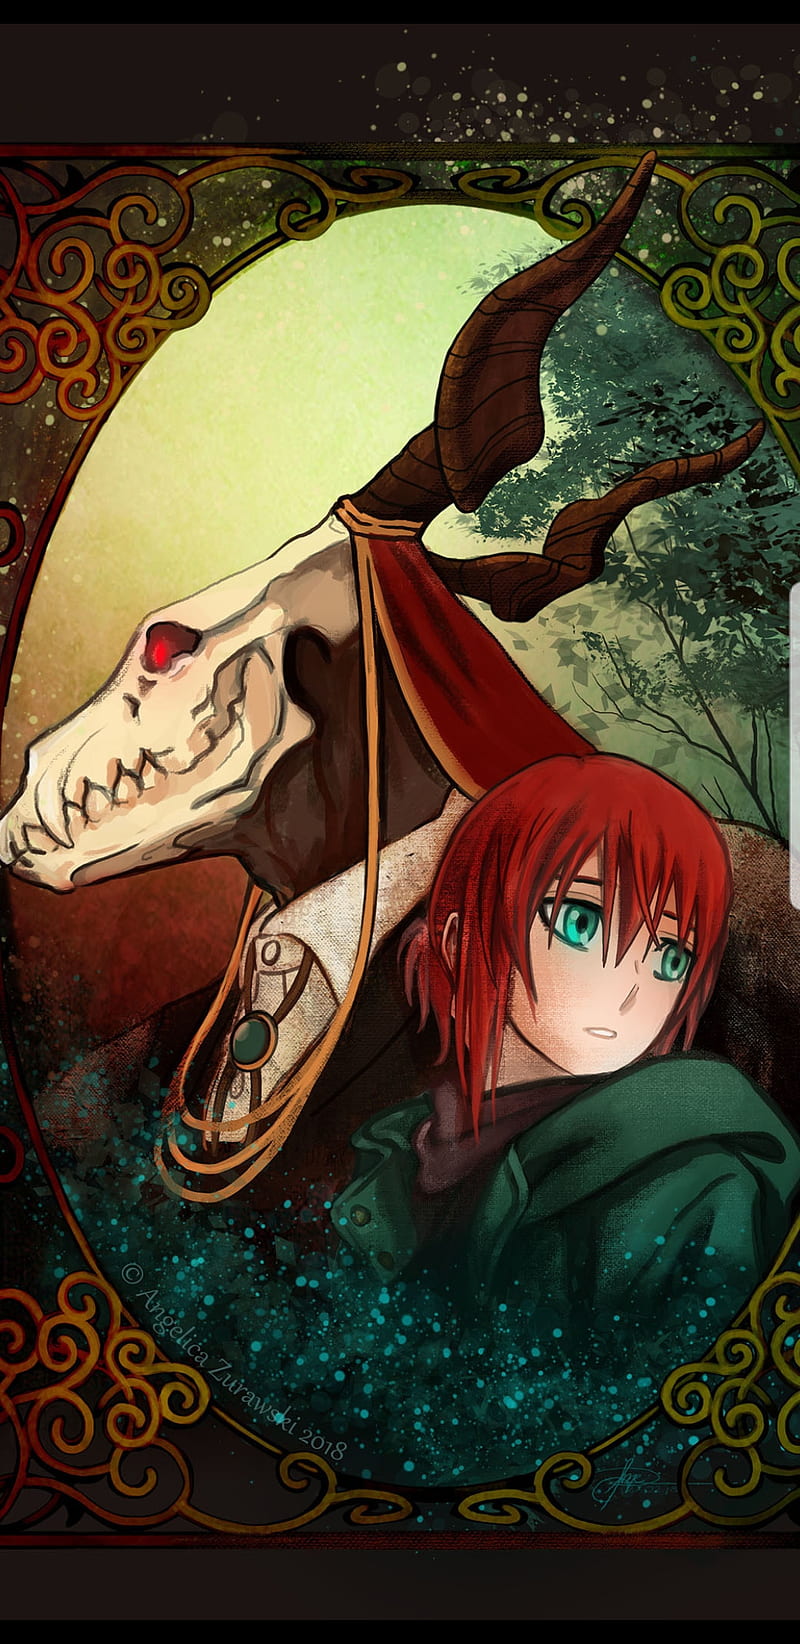 Mobile wallpaper: Anime, Dog, Creature, Elias Ainsworth, Chise Hatori, Mahoutsukai  No Yome, The Ancient Magus' Bride, 1292315 download the picture for free.